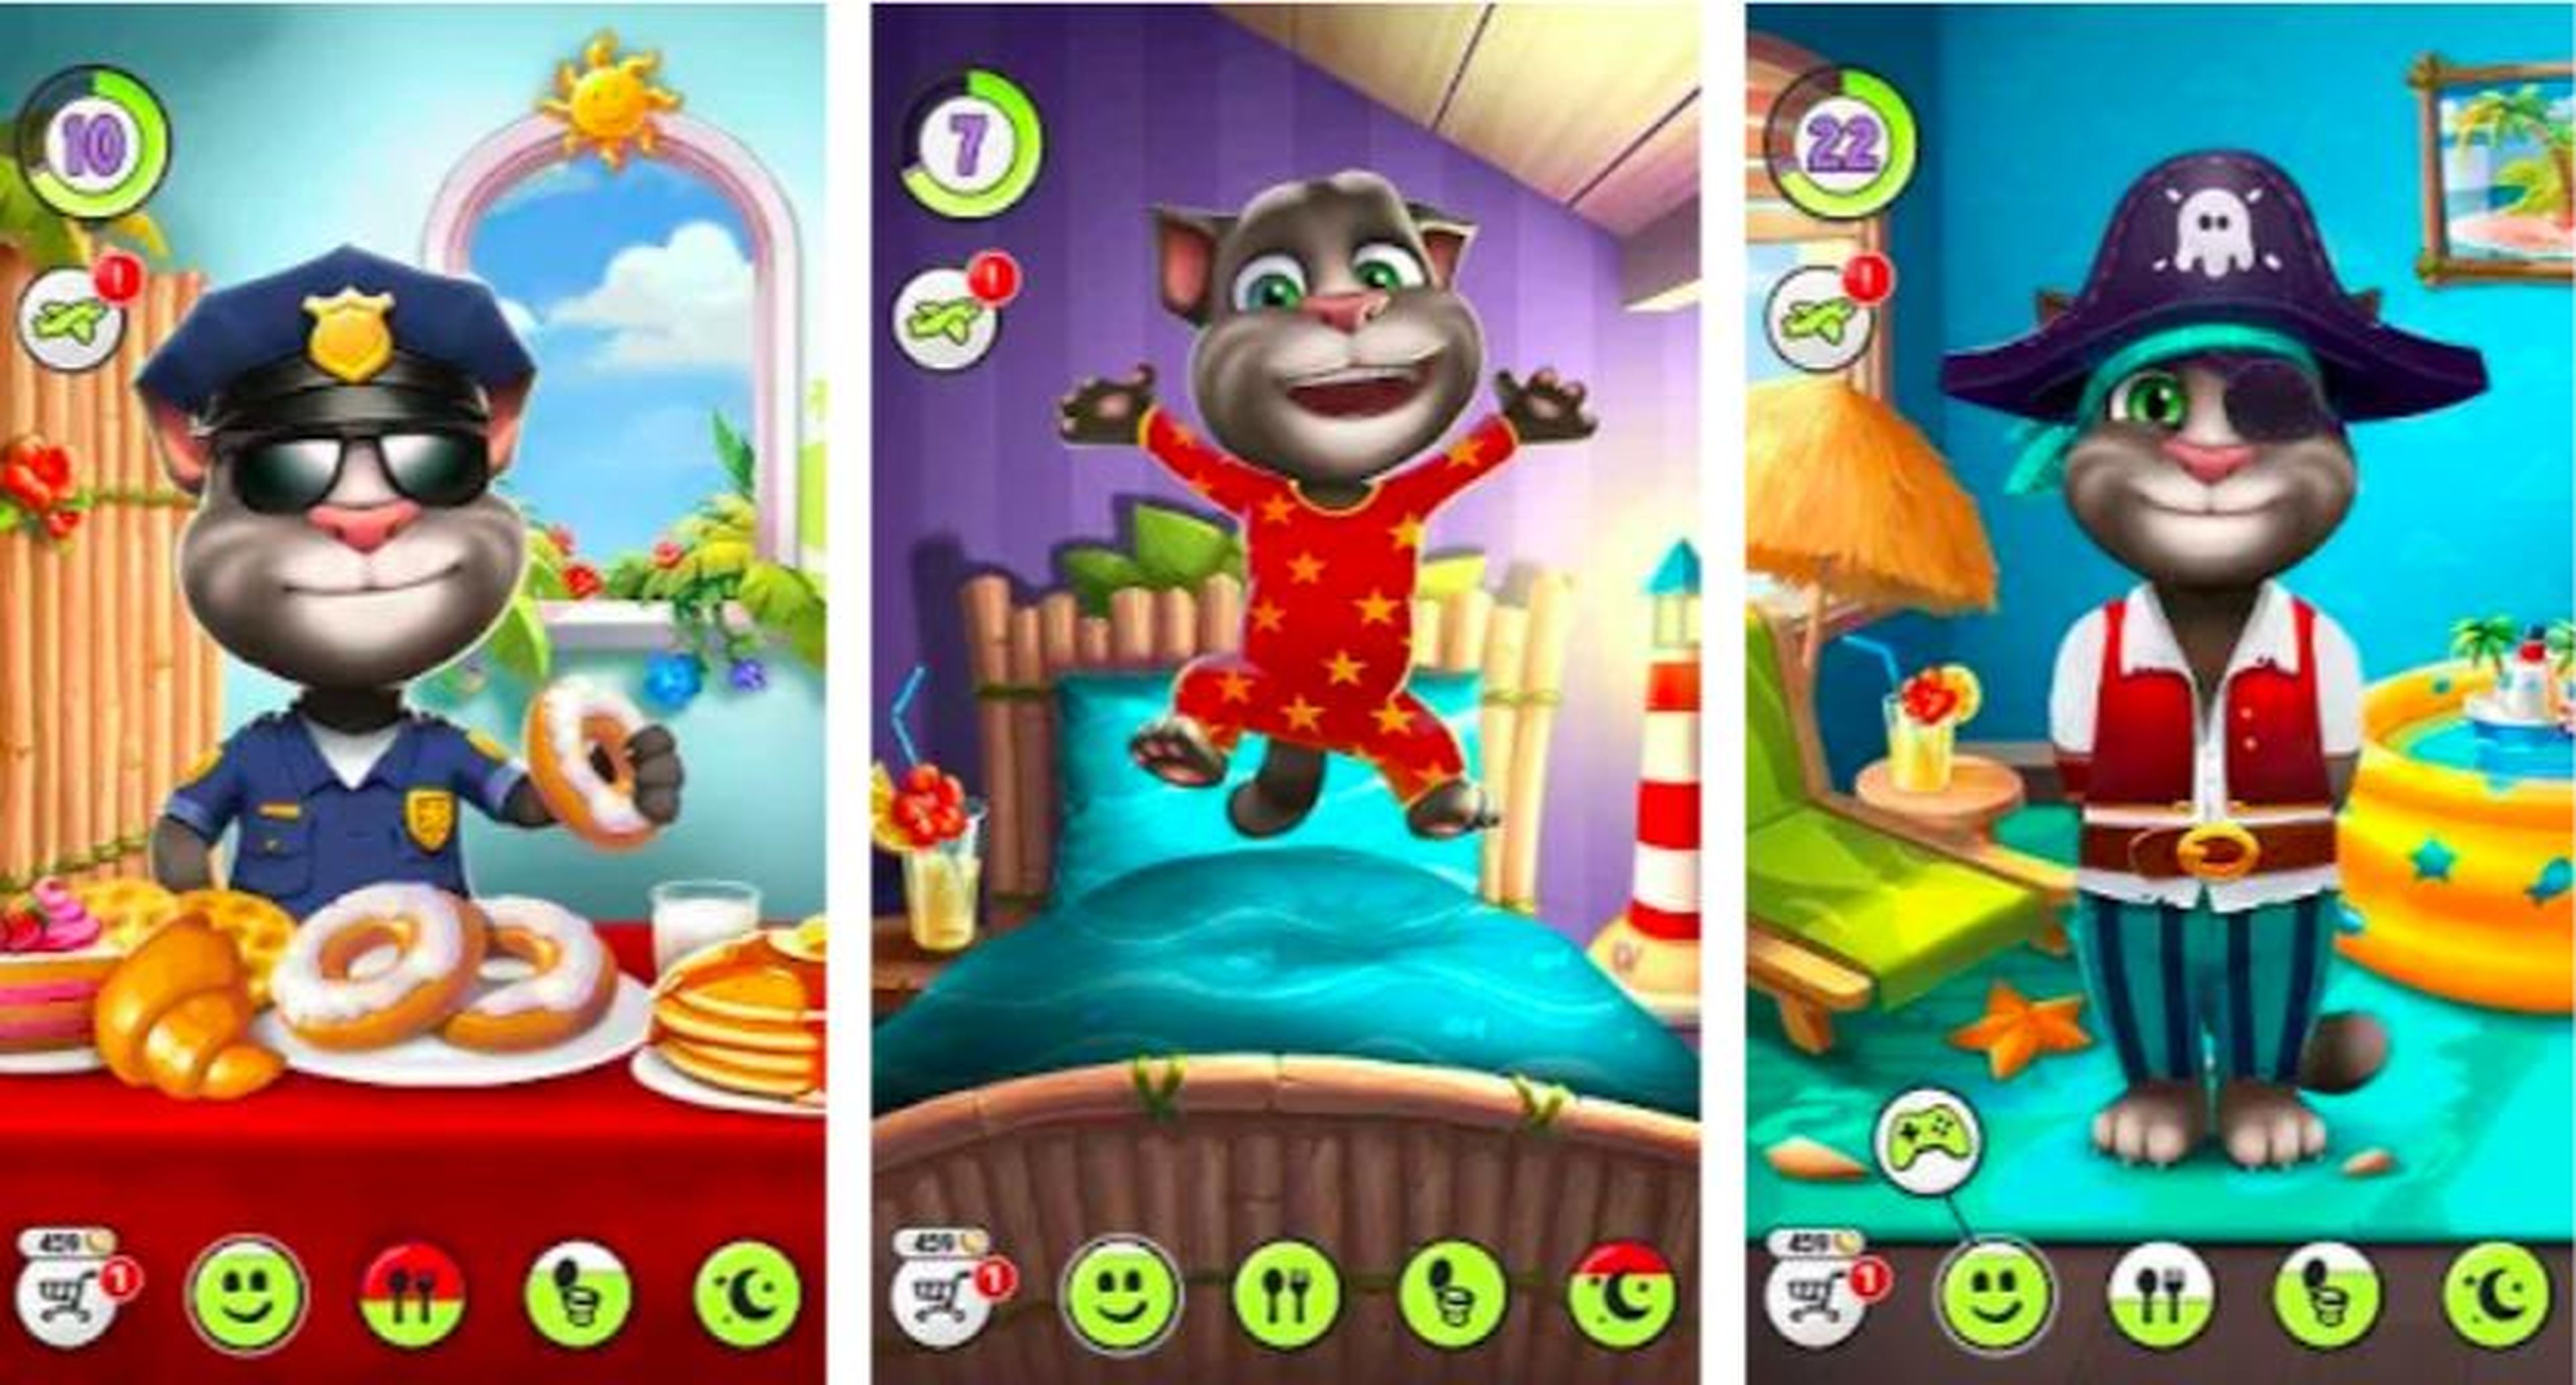 In second place for the most hours played is "My Talking Tom," a virtual pet game that iPhone and Android users have played for a whopping combined 3.42 billion hours.